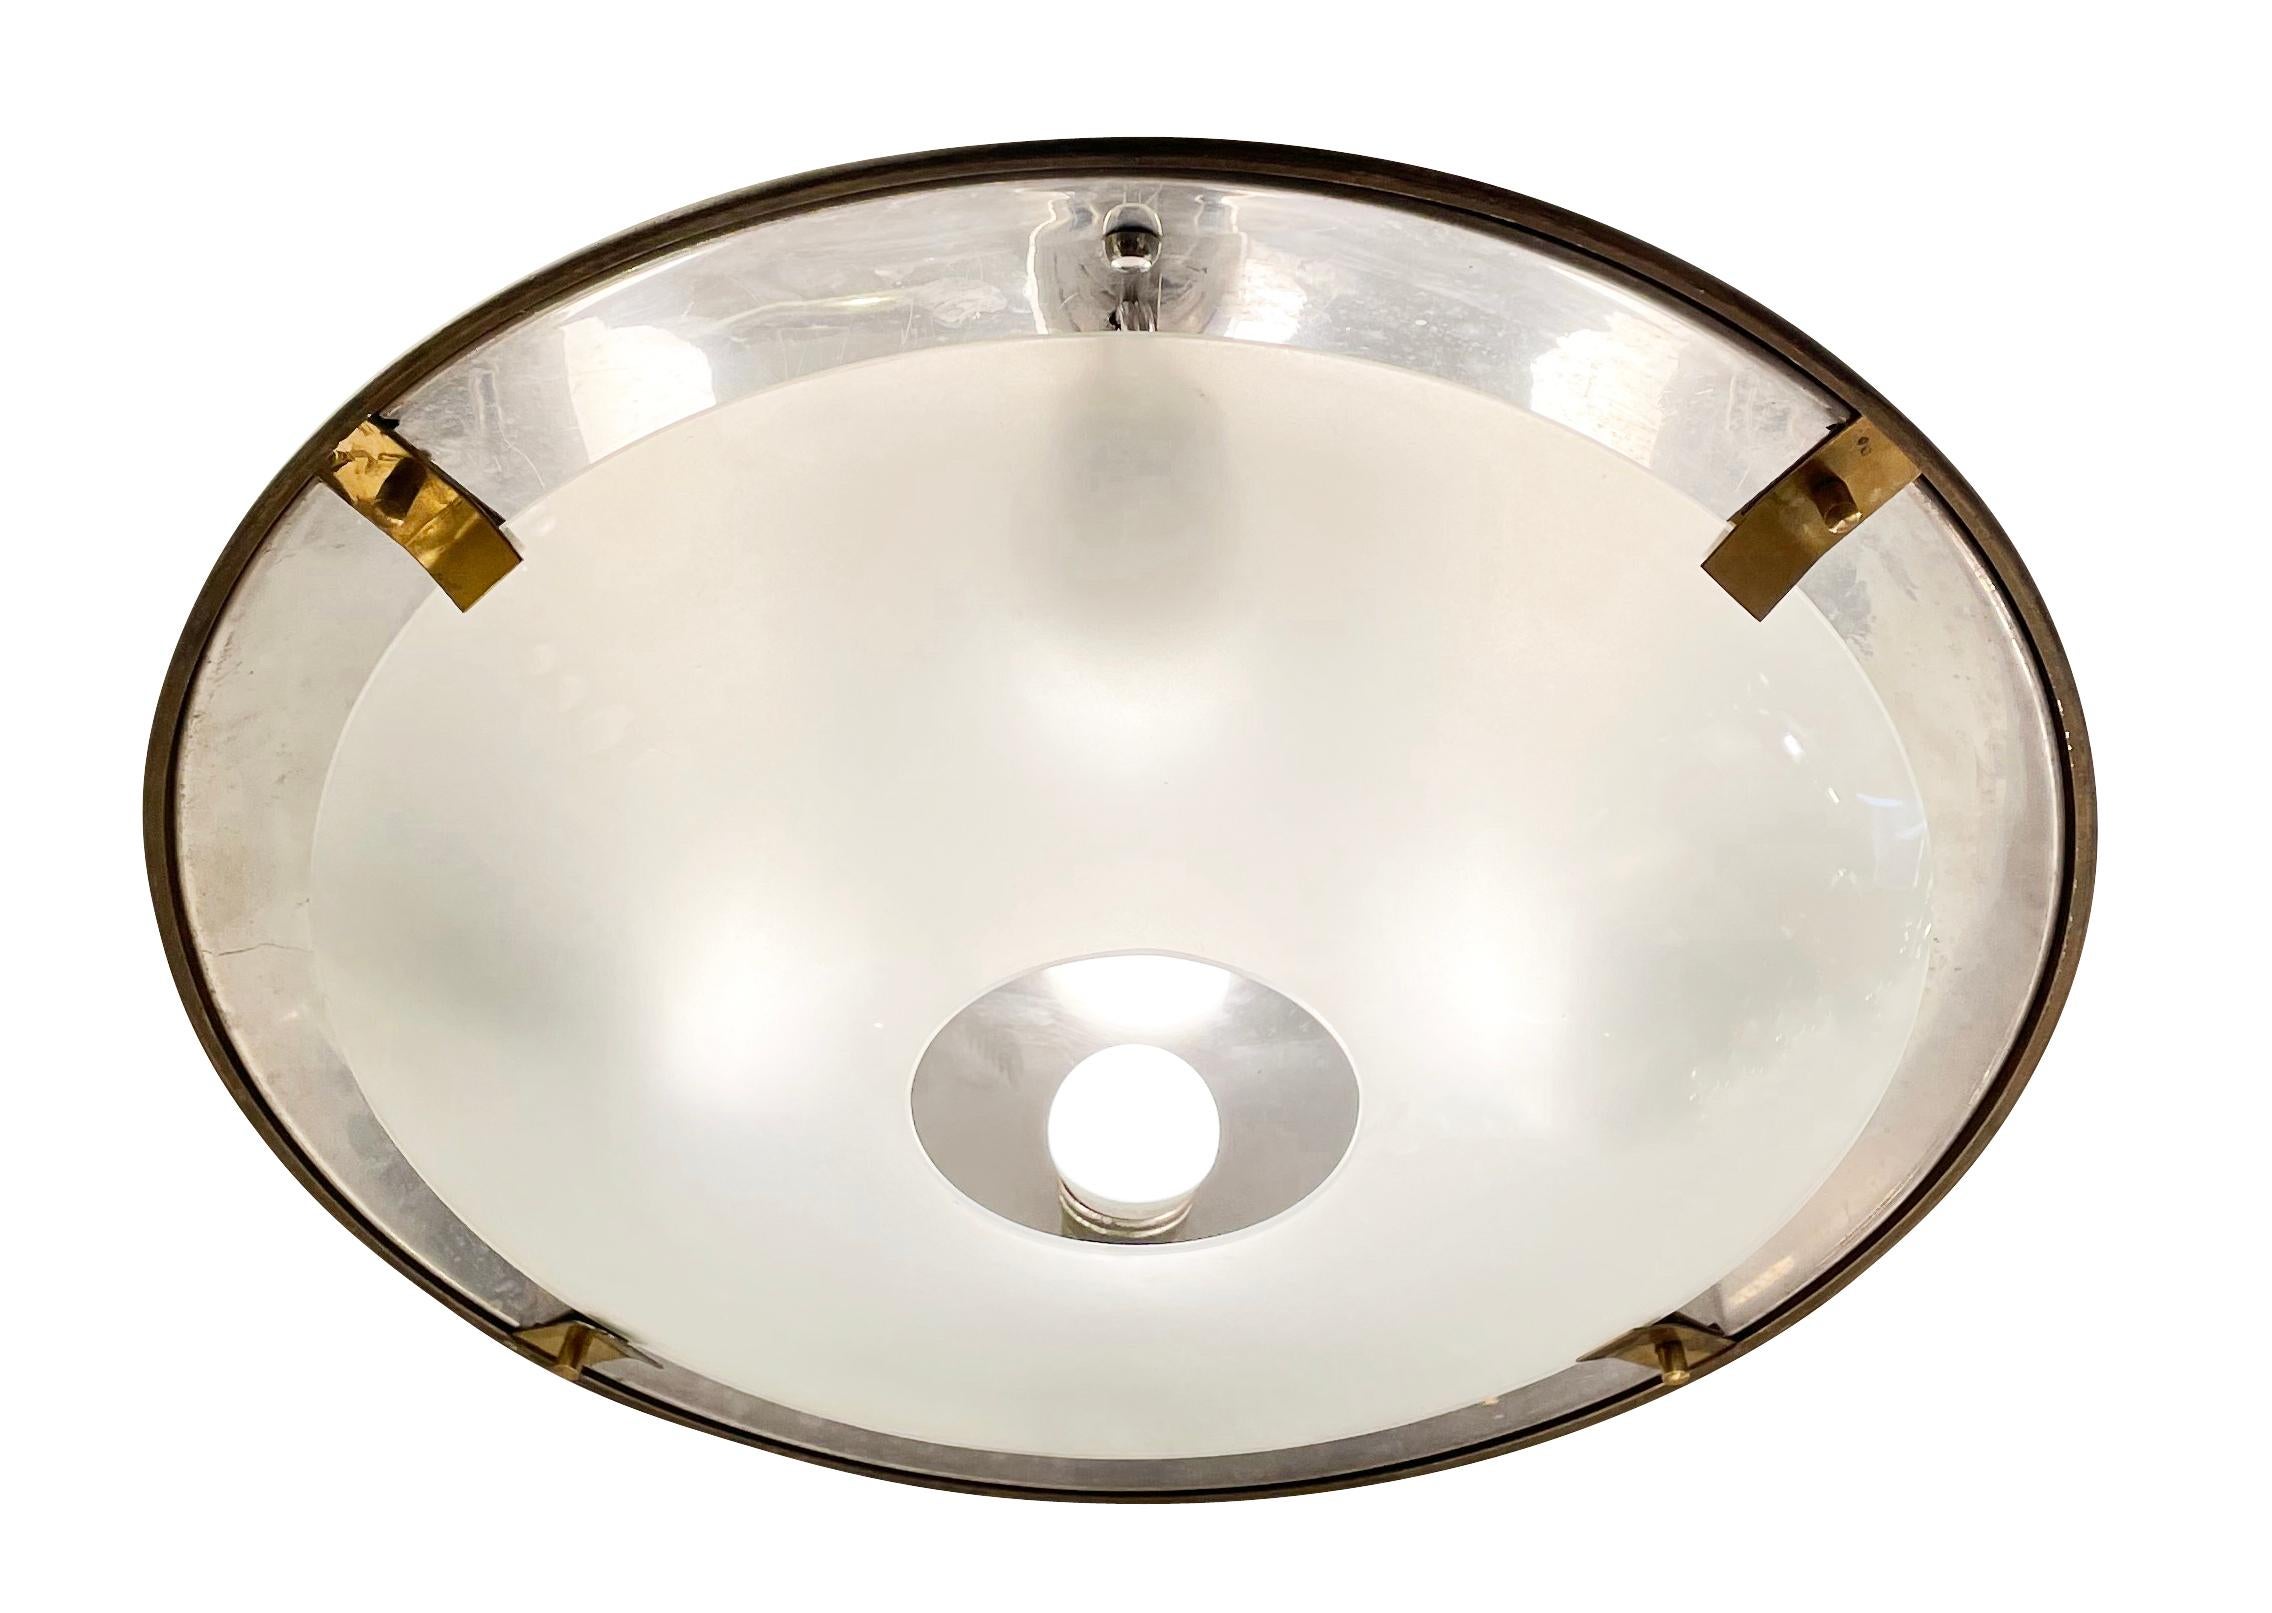 Italian midcentury semi-flush ceiling light with a perforated frosted glass shade and white and black exterior. Glass clips are brass and holds four E26 bulbs.

Condition: Excellent vintage condition, minor wear consistent with age and